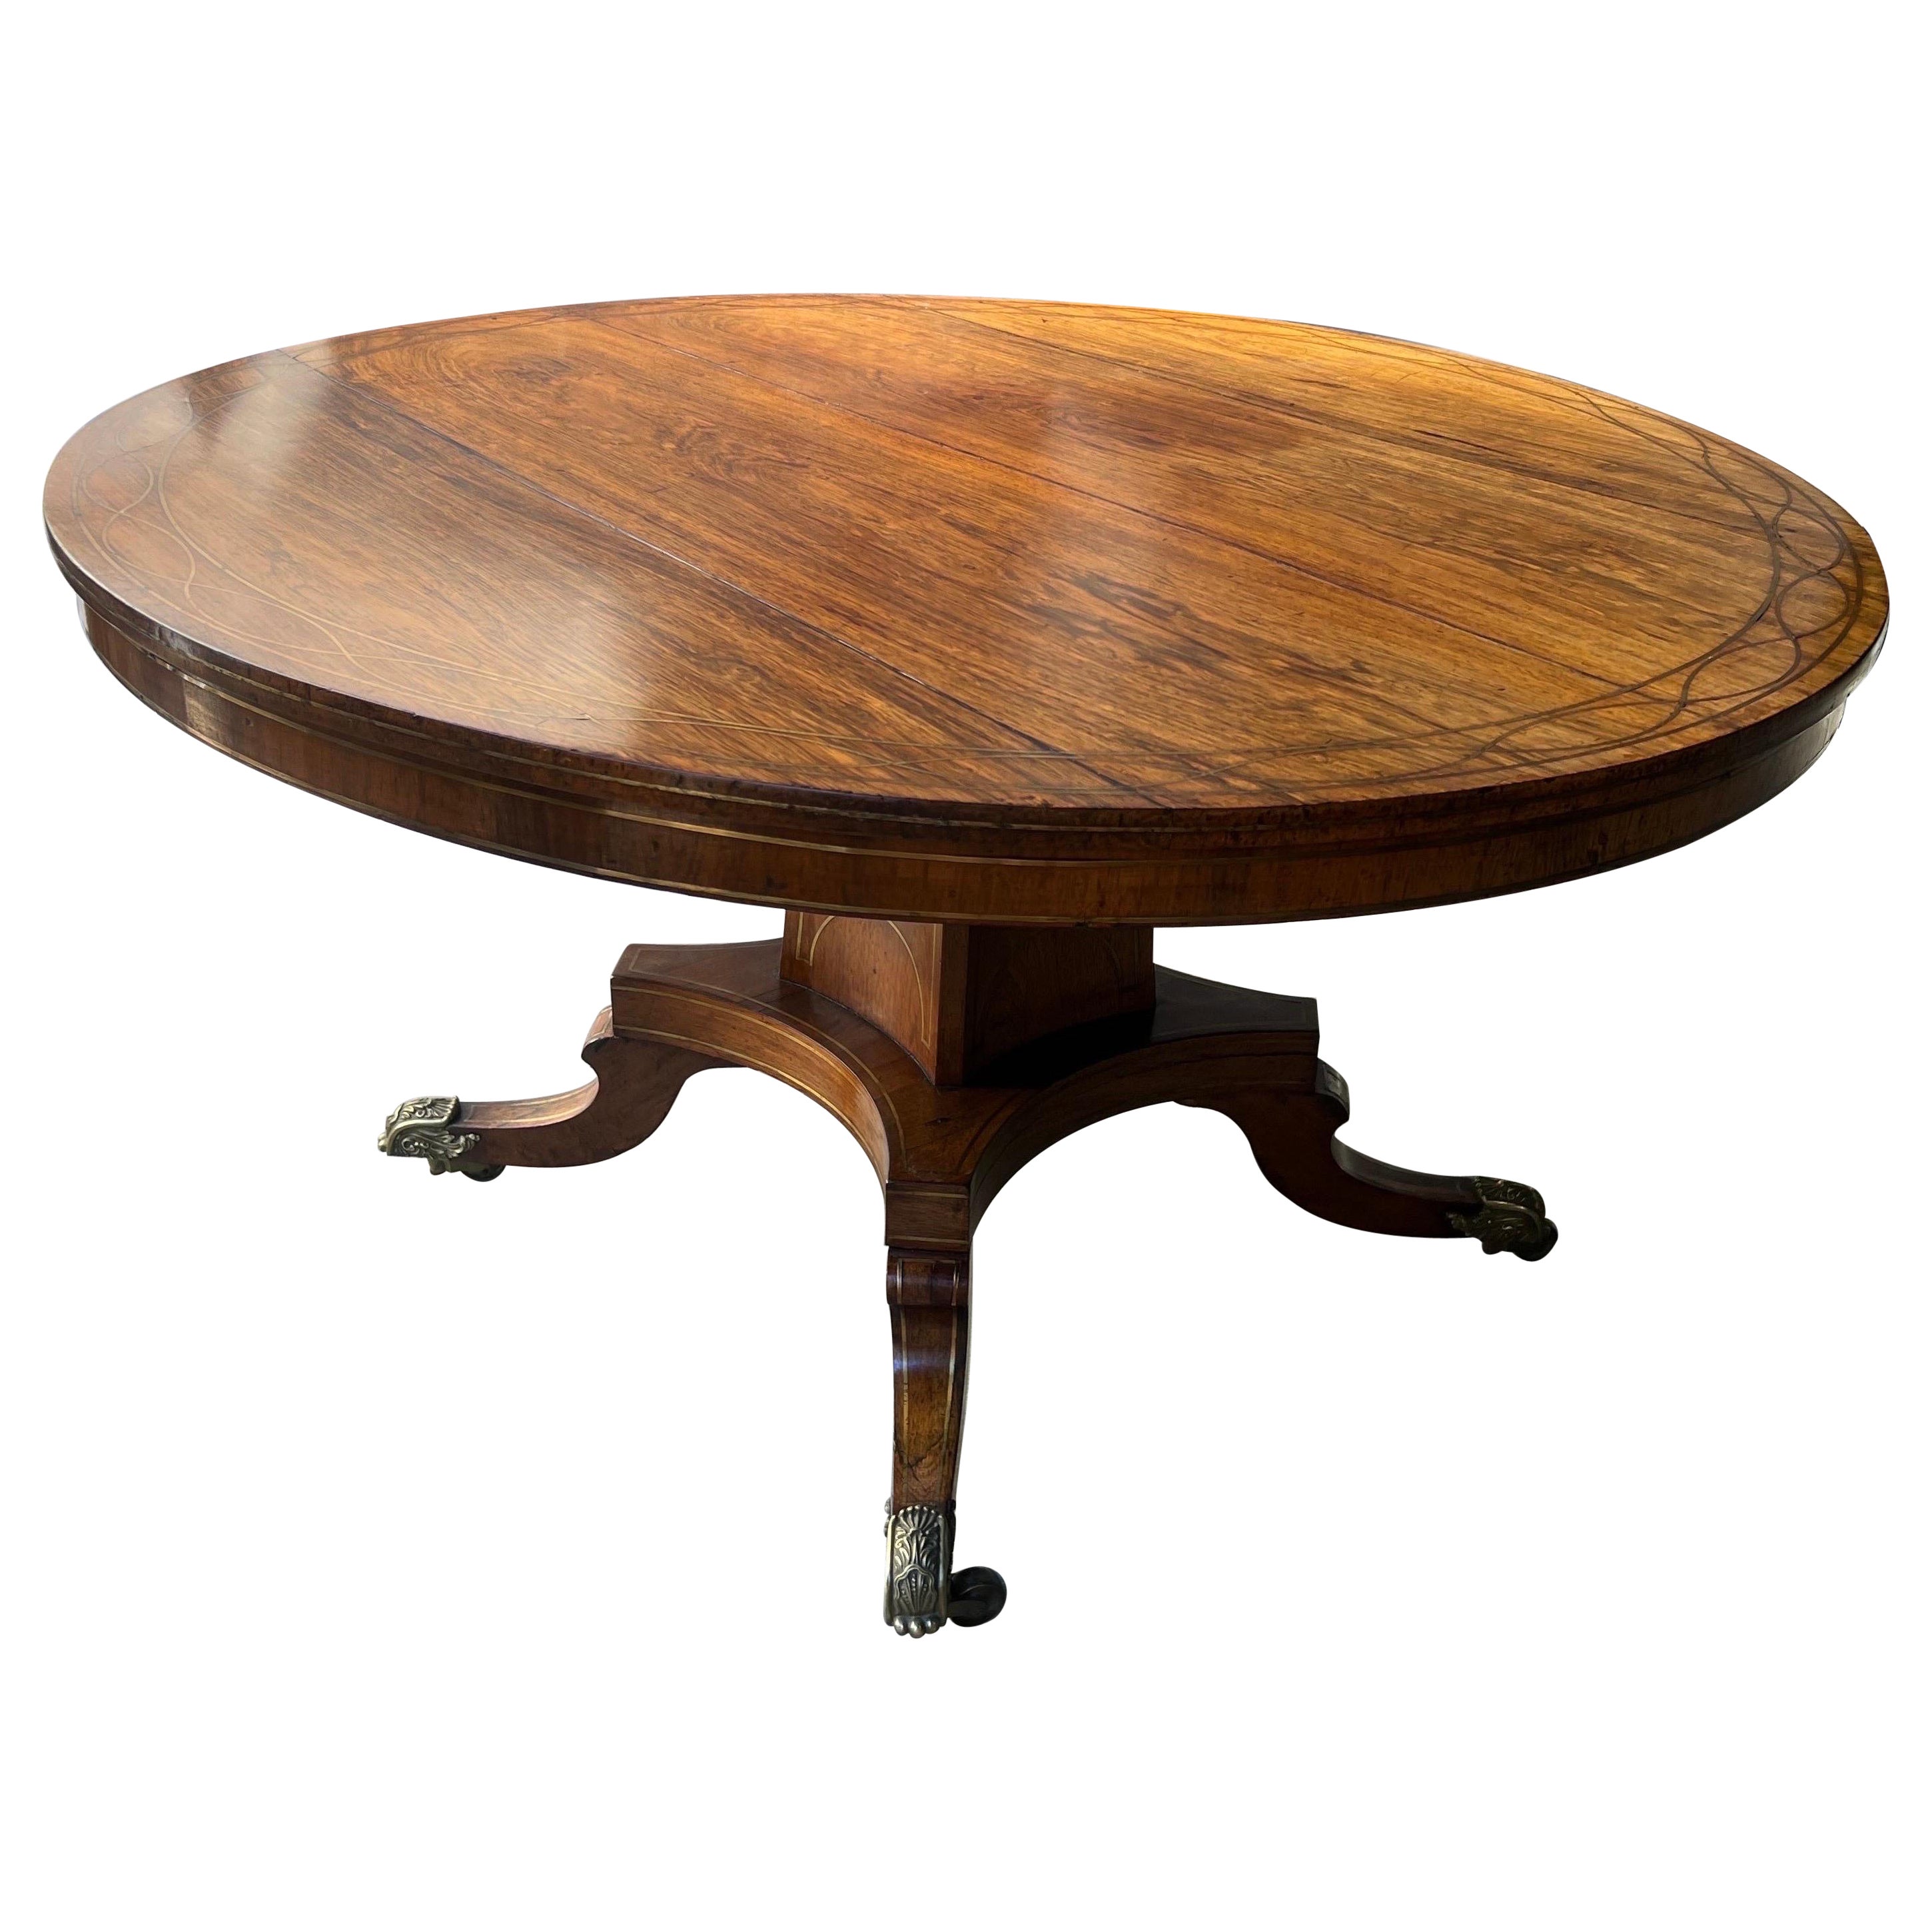 Fine 19th century brass inlaid rosewood English Regency period center table   For Sale